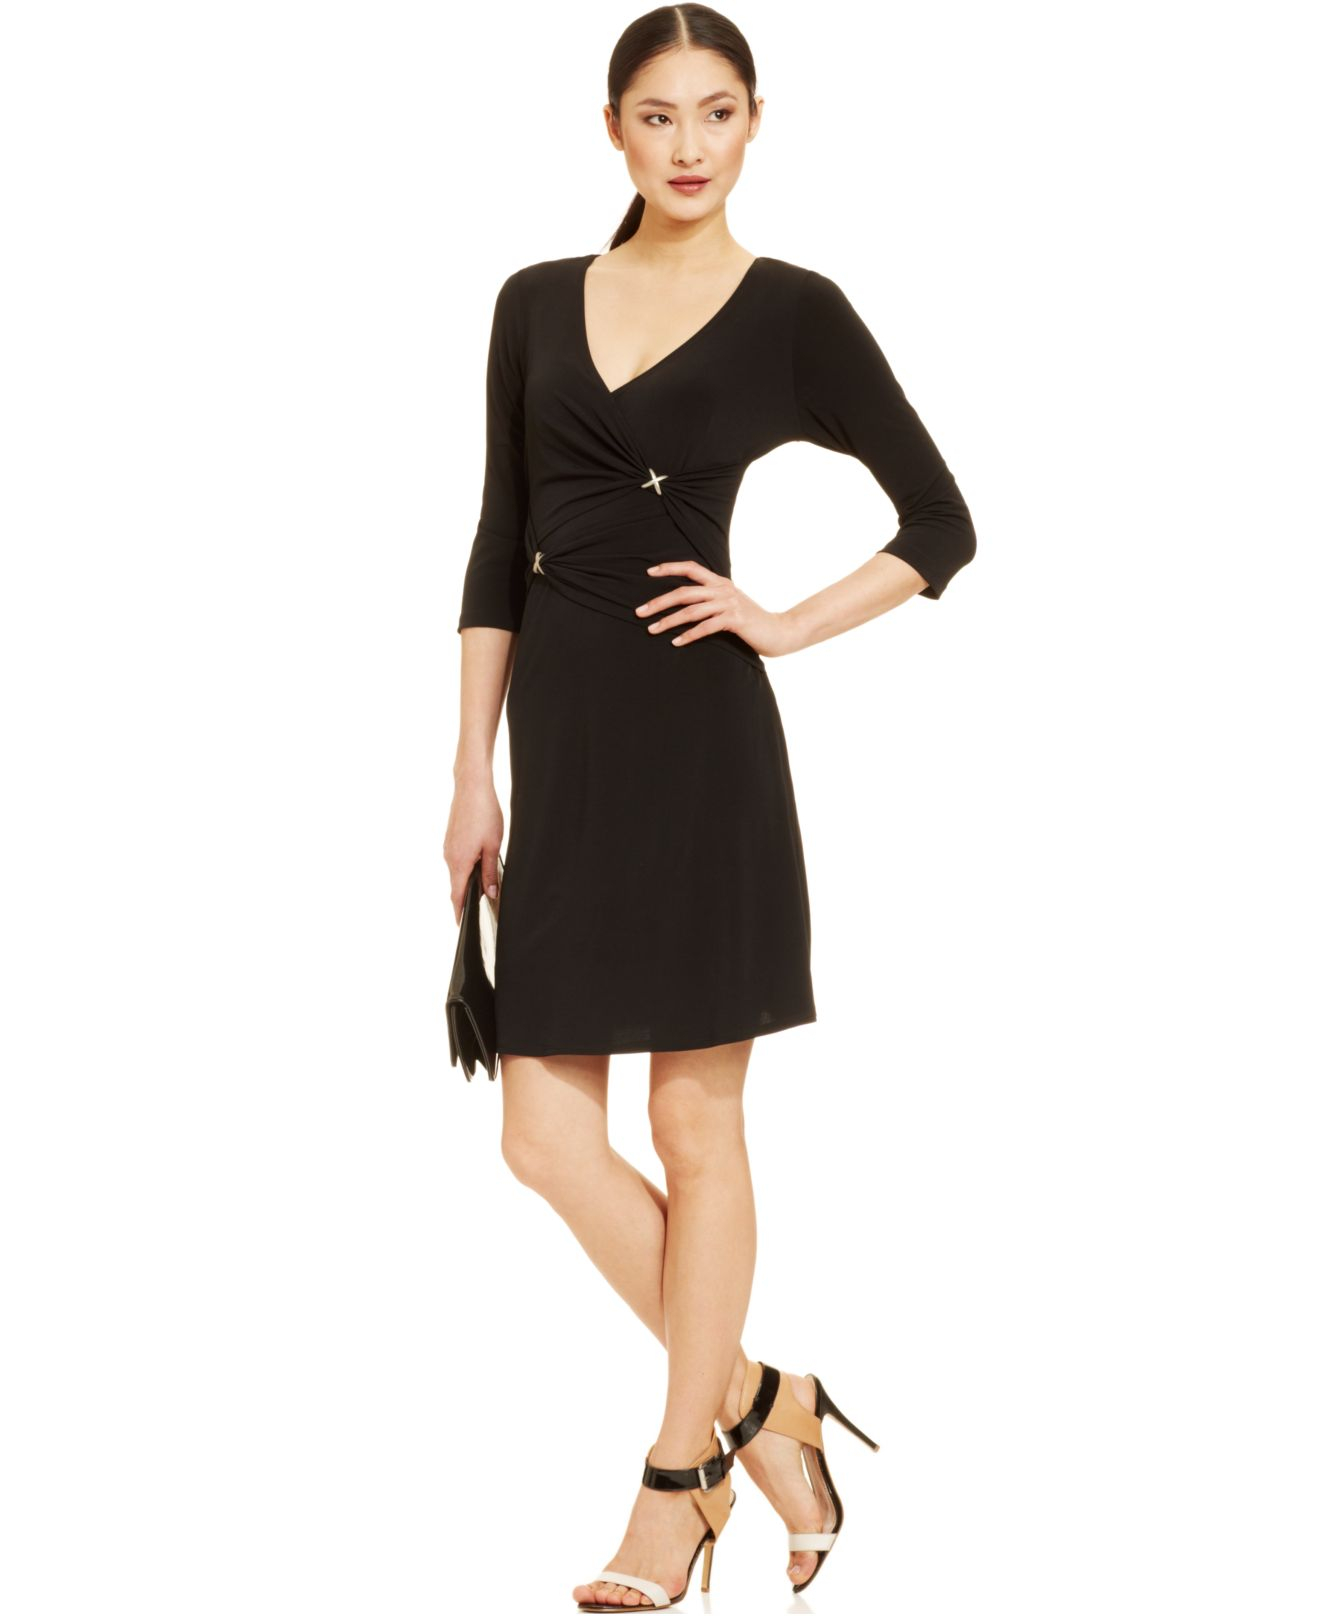 Lyst - Miraclesuit Ruched Hardware Faux-Wrap Dress in Black